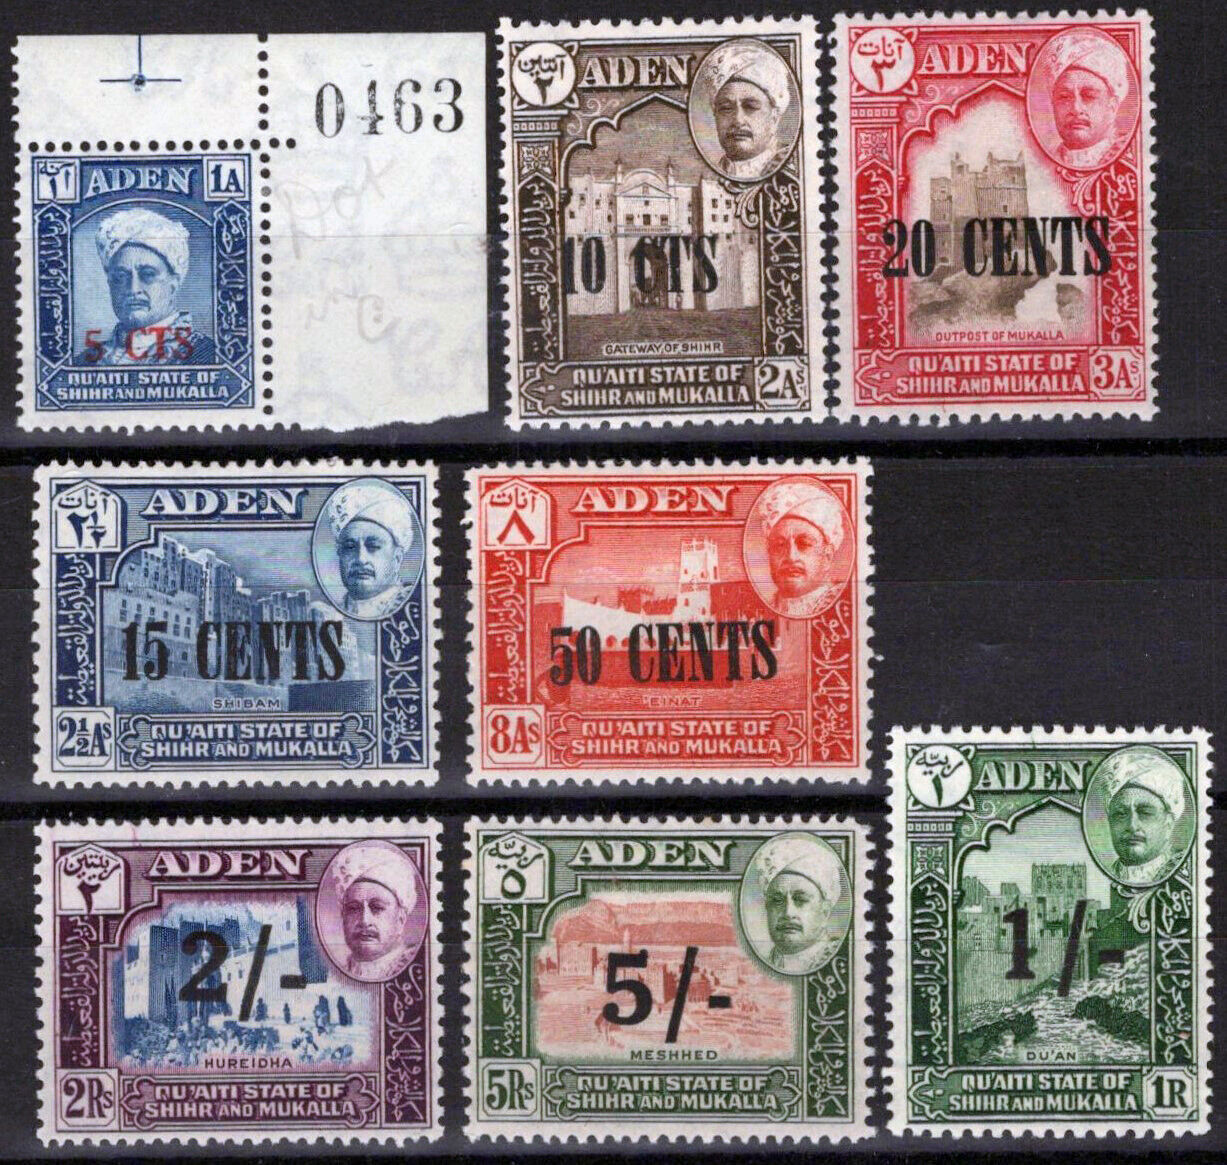 ZAYIX 1951 Aden Quaiti State 20-27 MH Definitives with New Values 033023S163